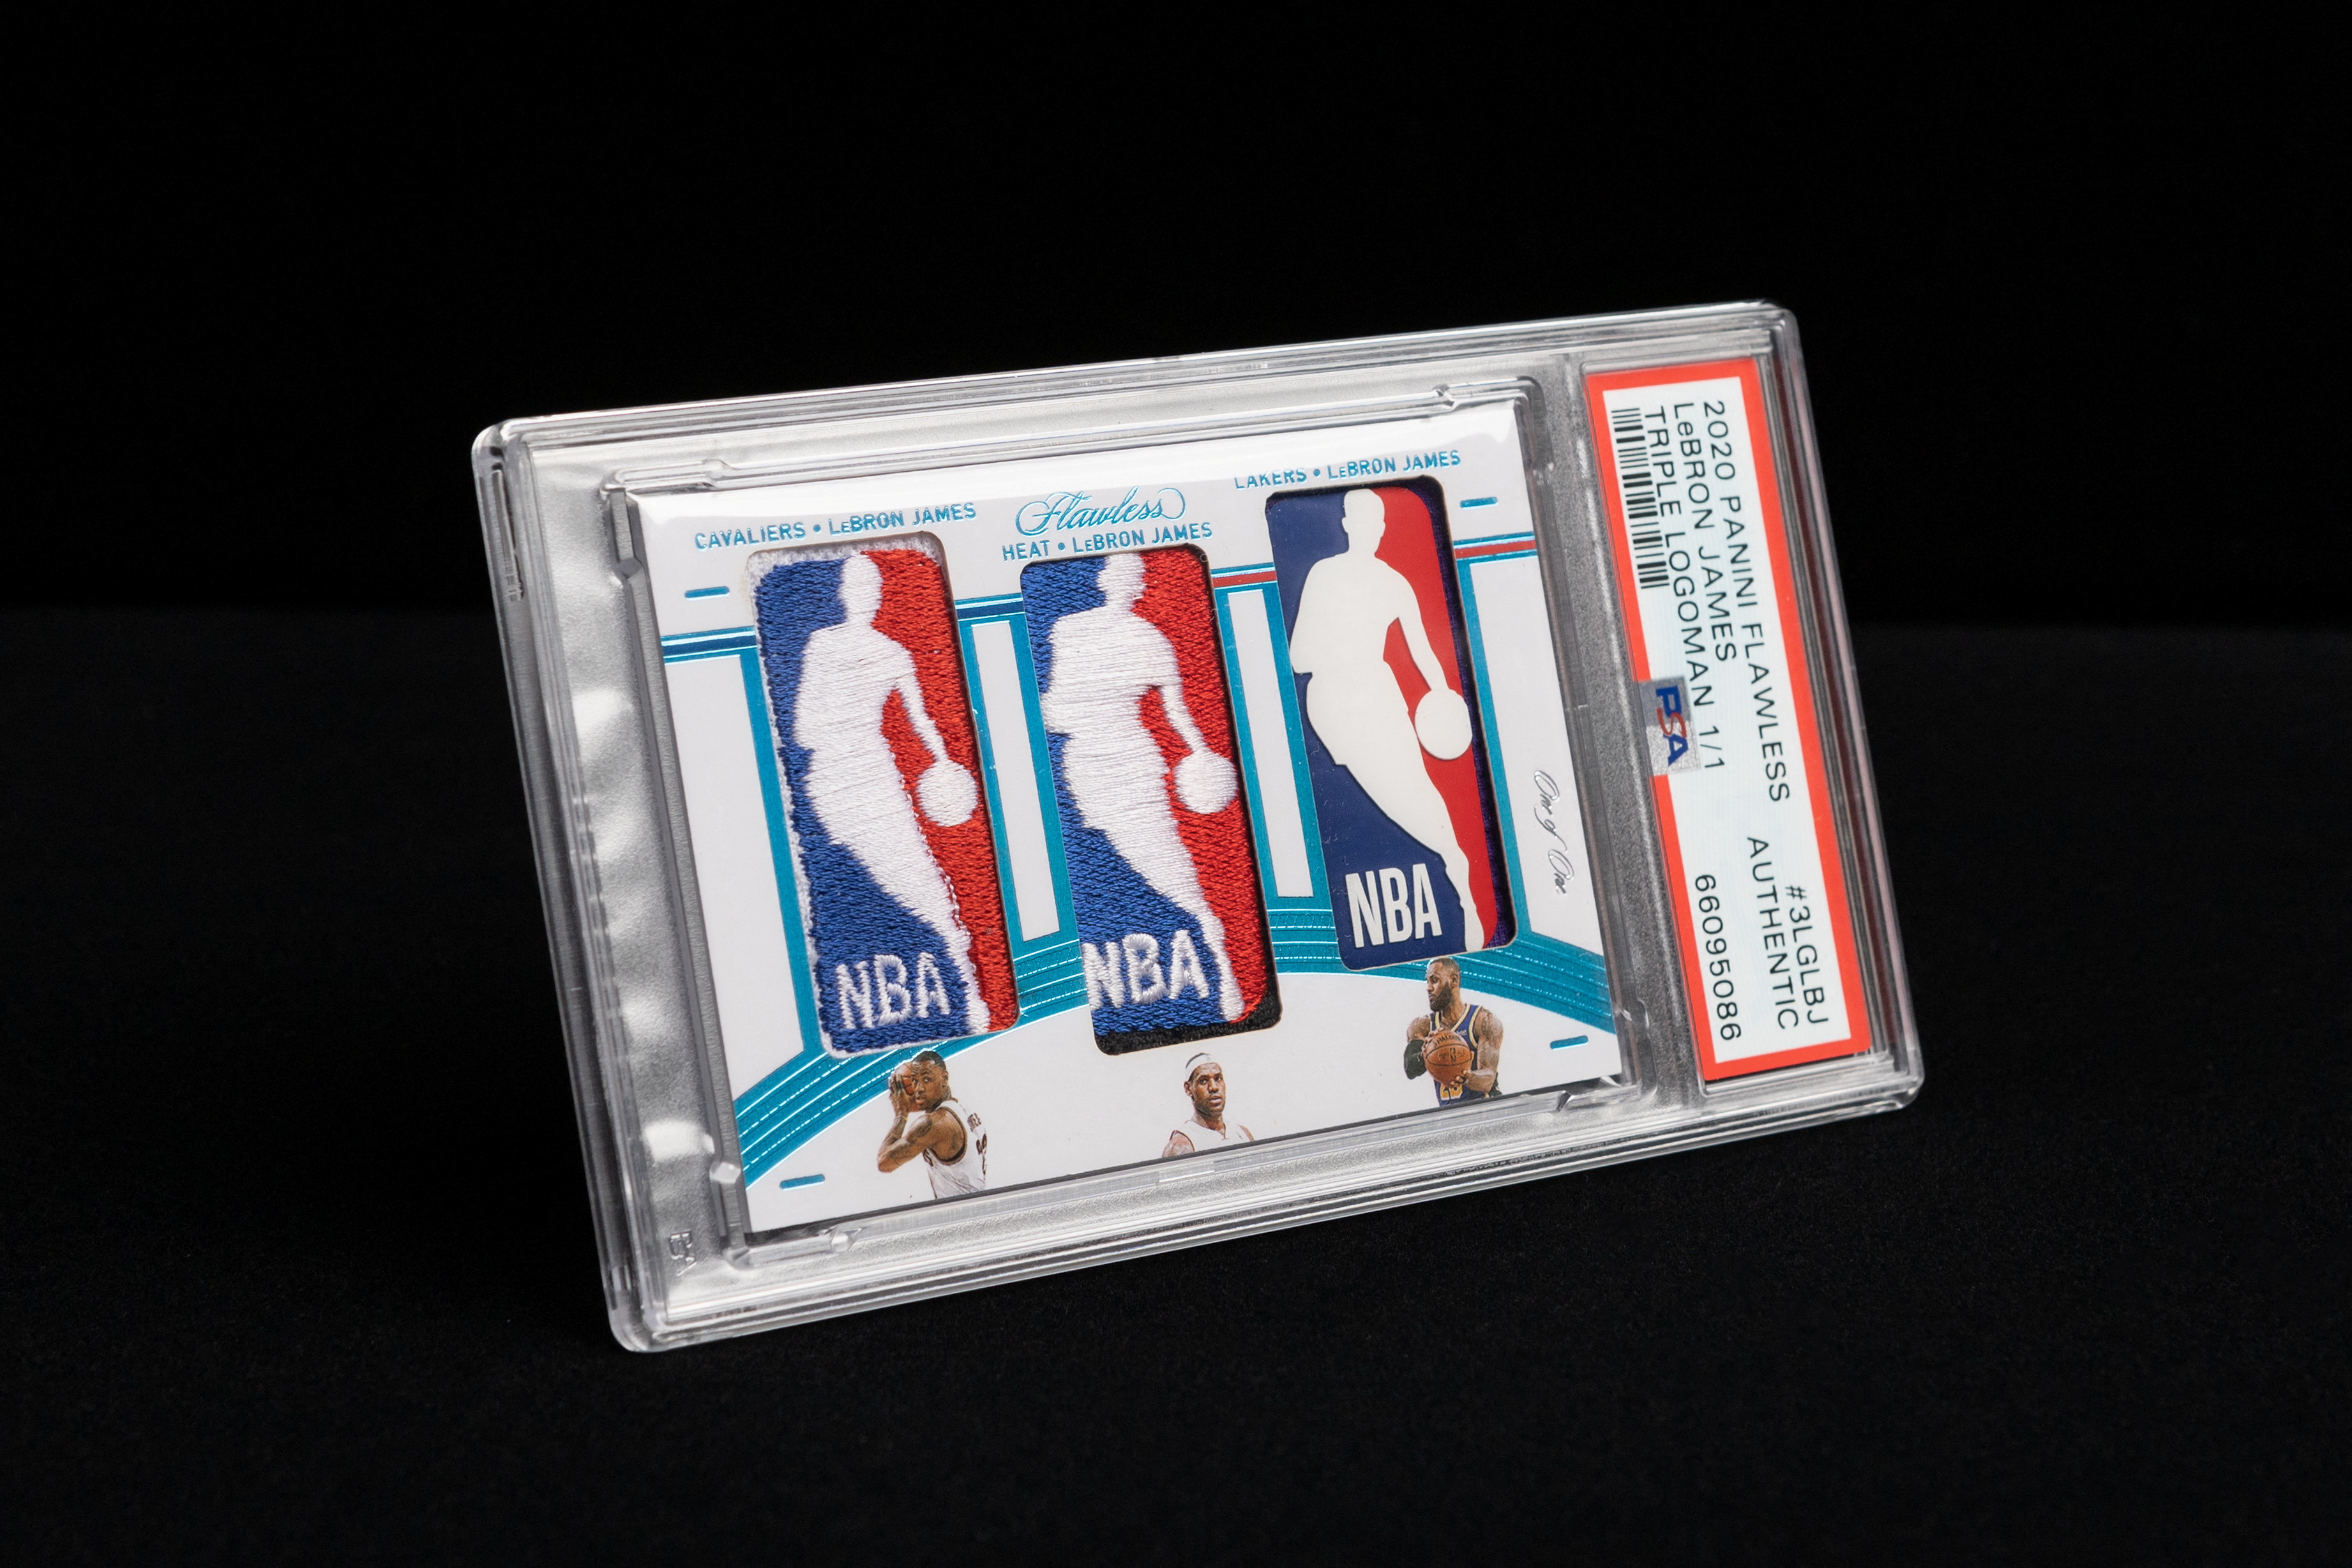 'Holy Grail' LeBron James card expected to top $6 million at auction